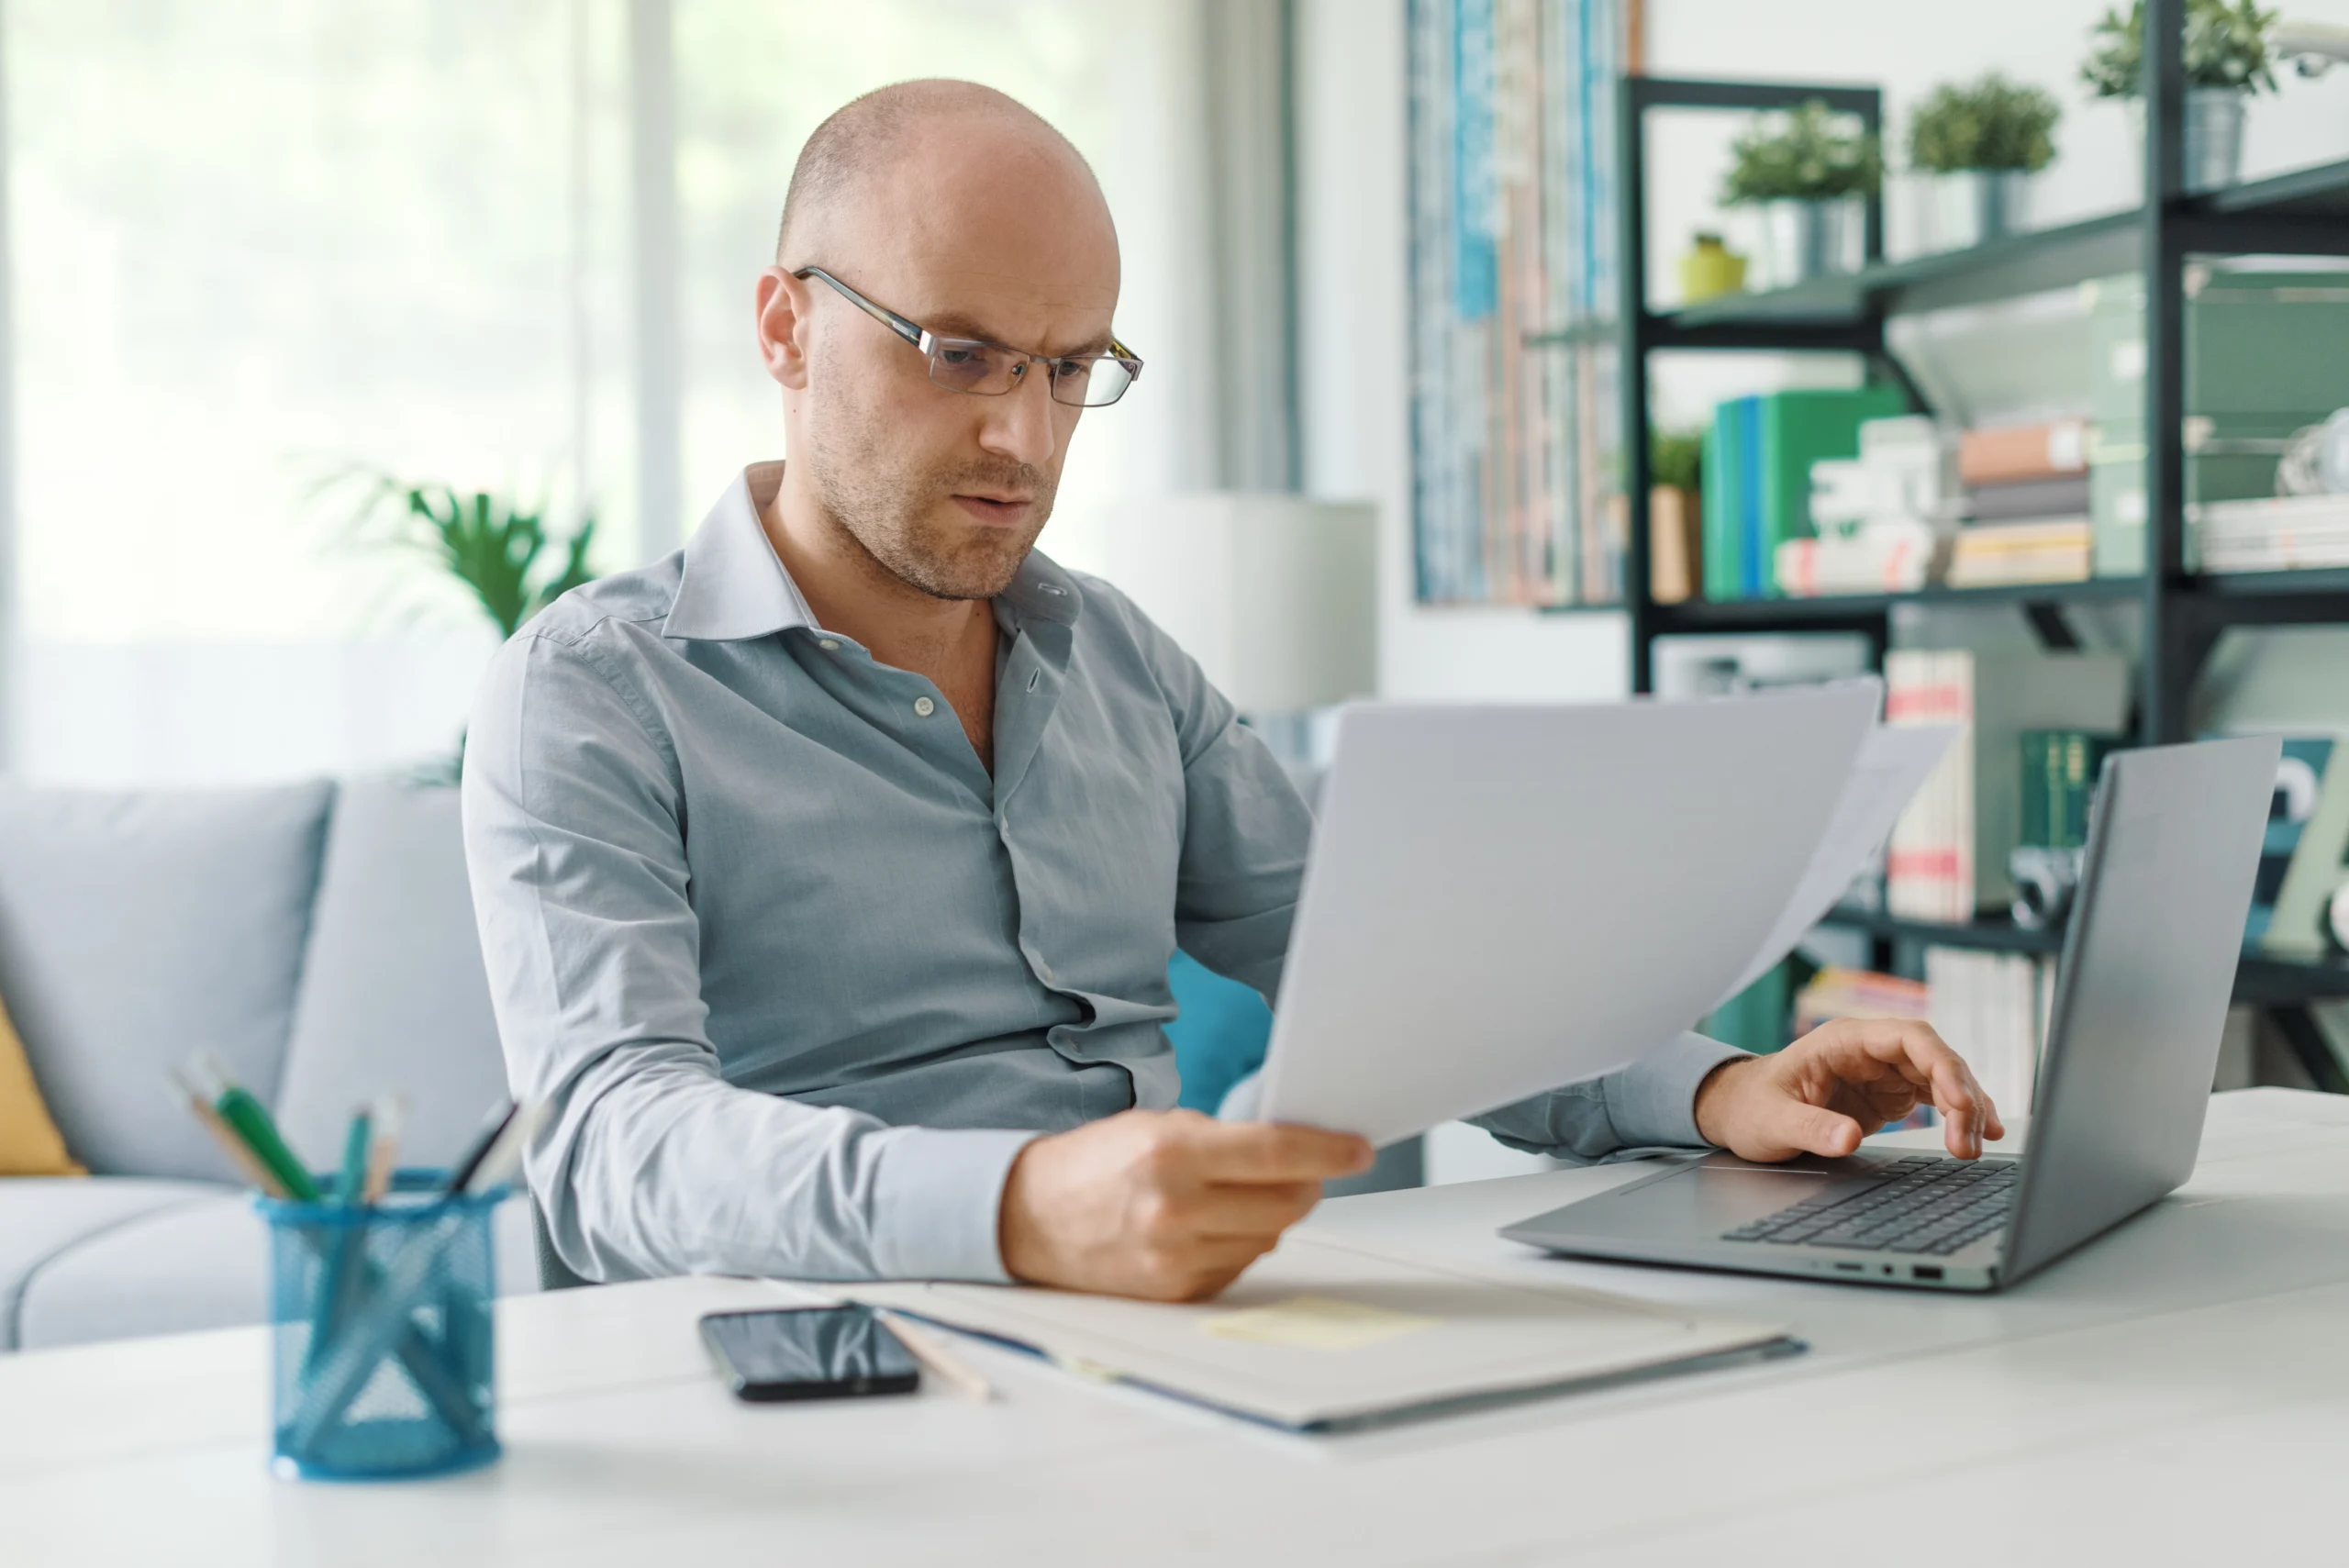 Man wearing glasses and business shirt is checking his documents for overdue tax returns